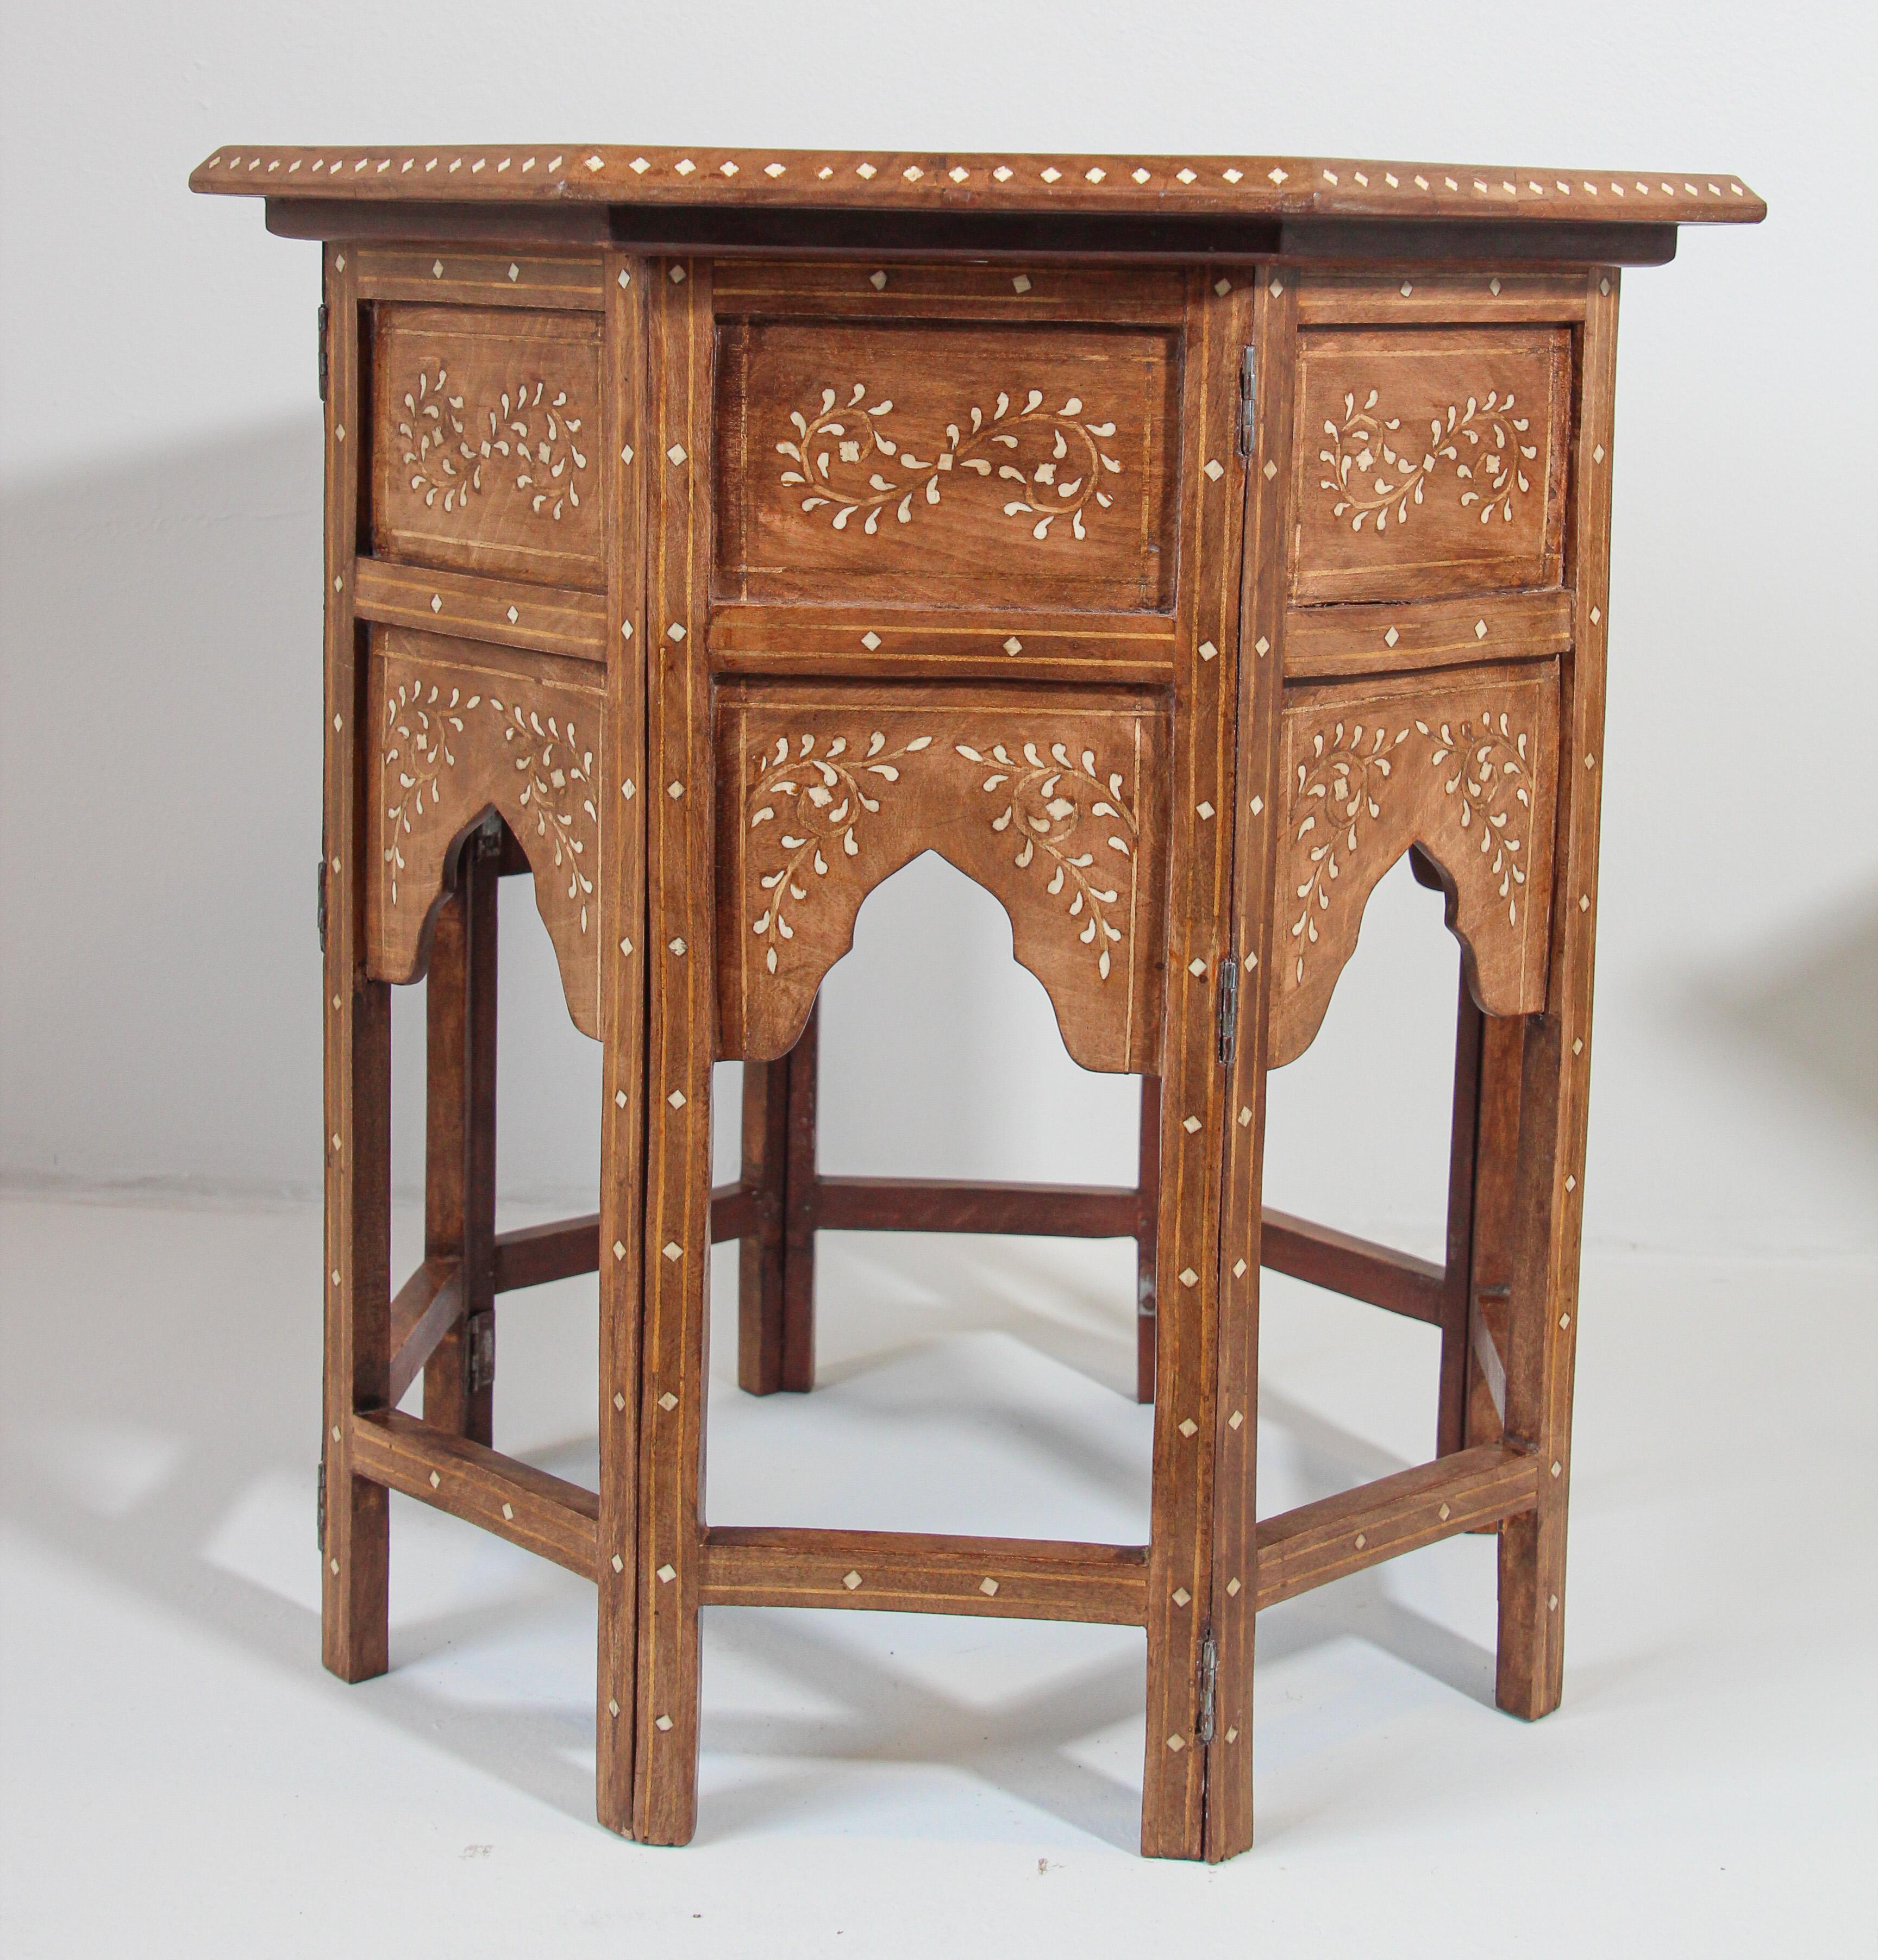 Hand-Carved Anglo-Indian Octagonal Mughal Moorish Chess Game Table with Inlay India